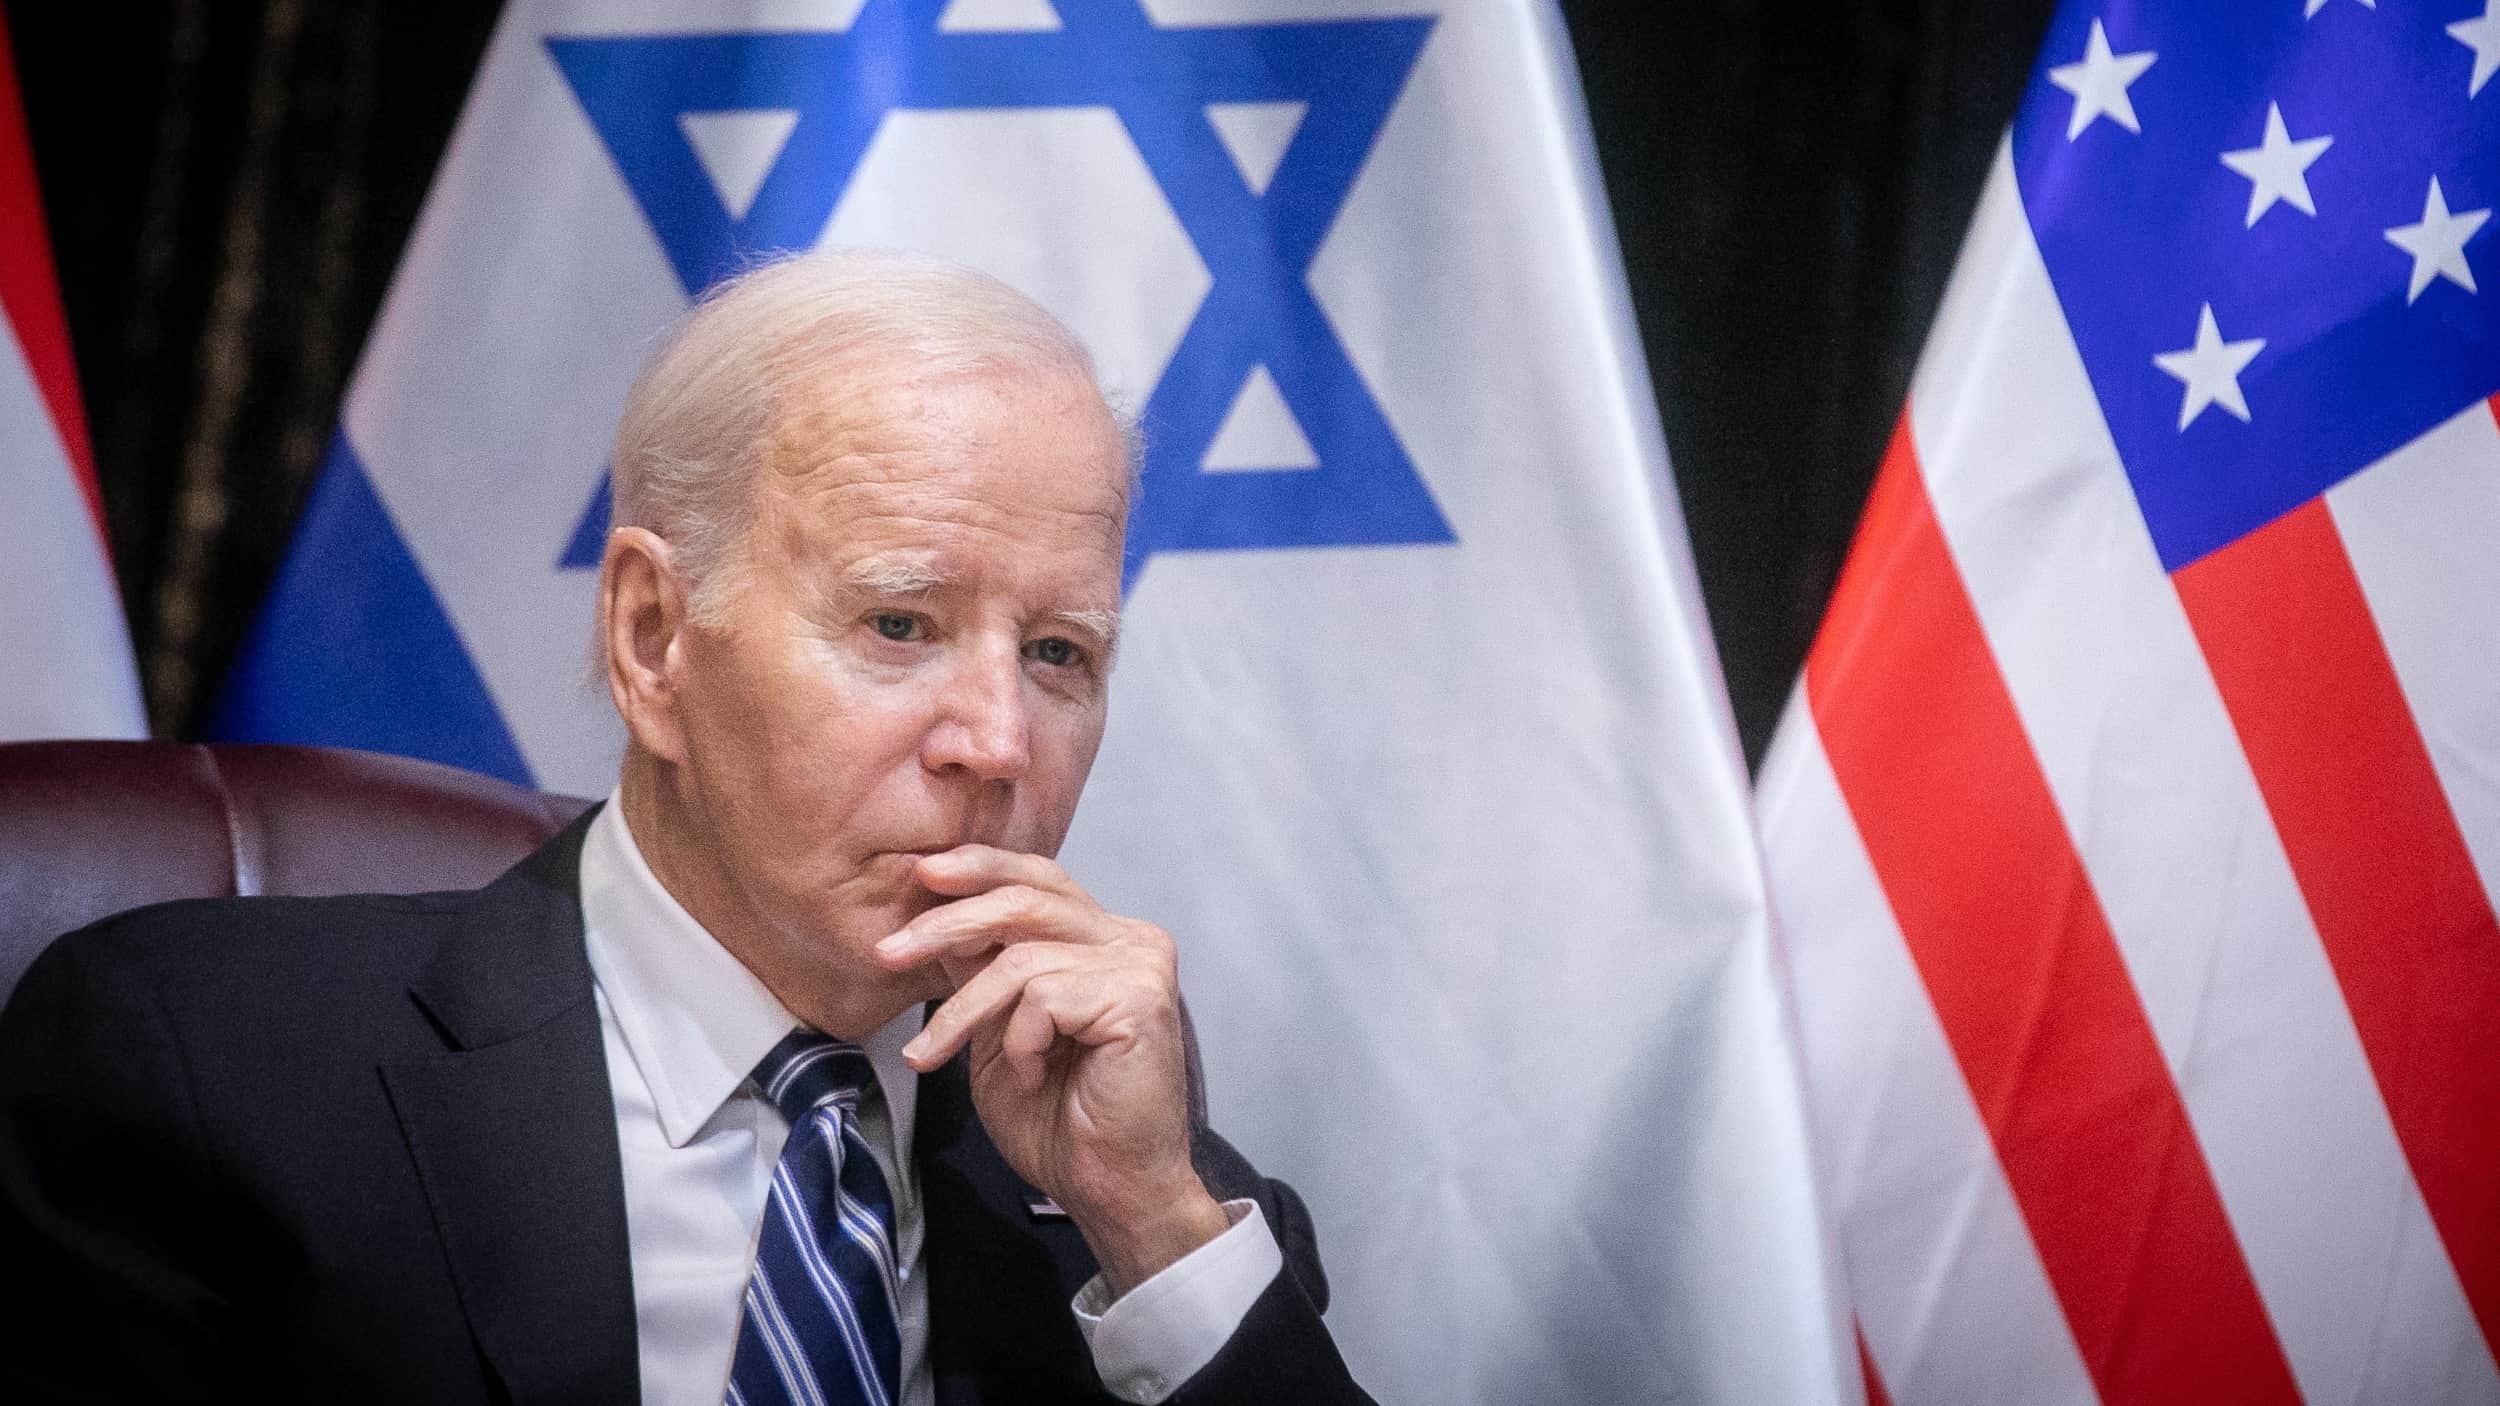 Biden: US support for Israel’s security is ‘ironclad’